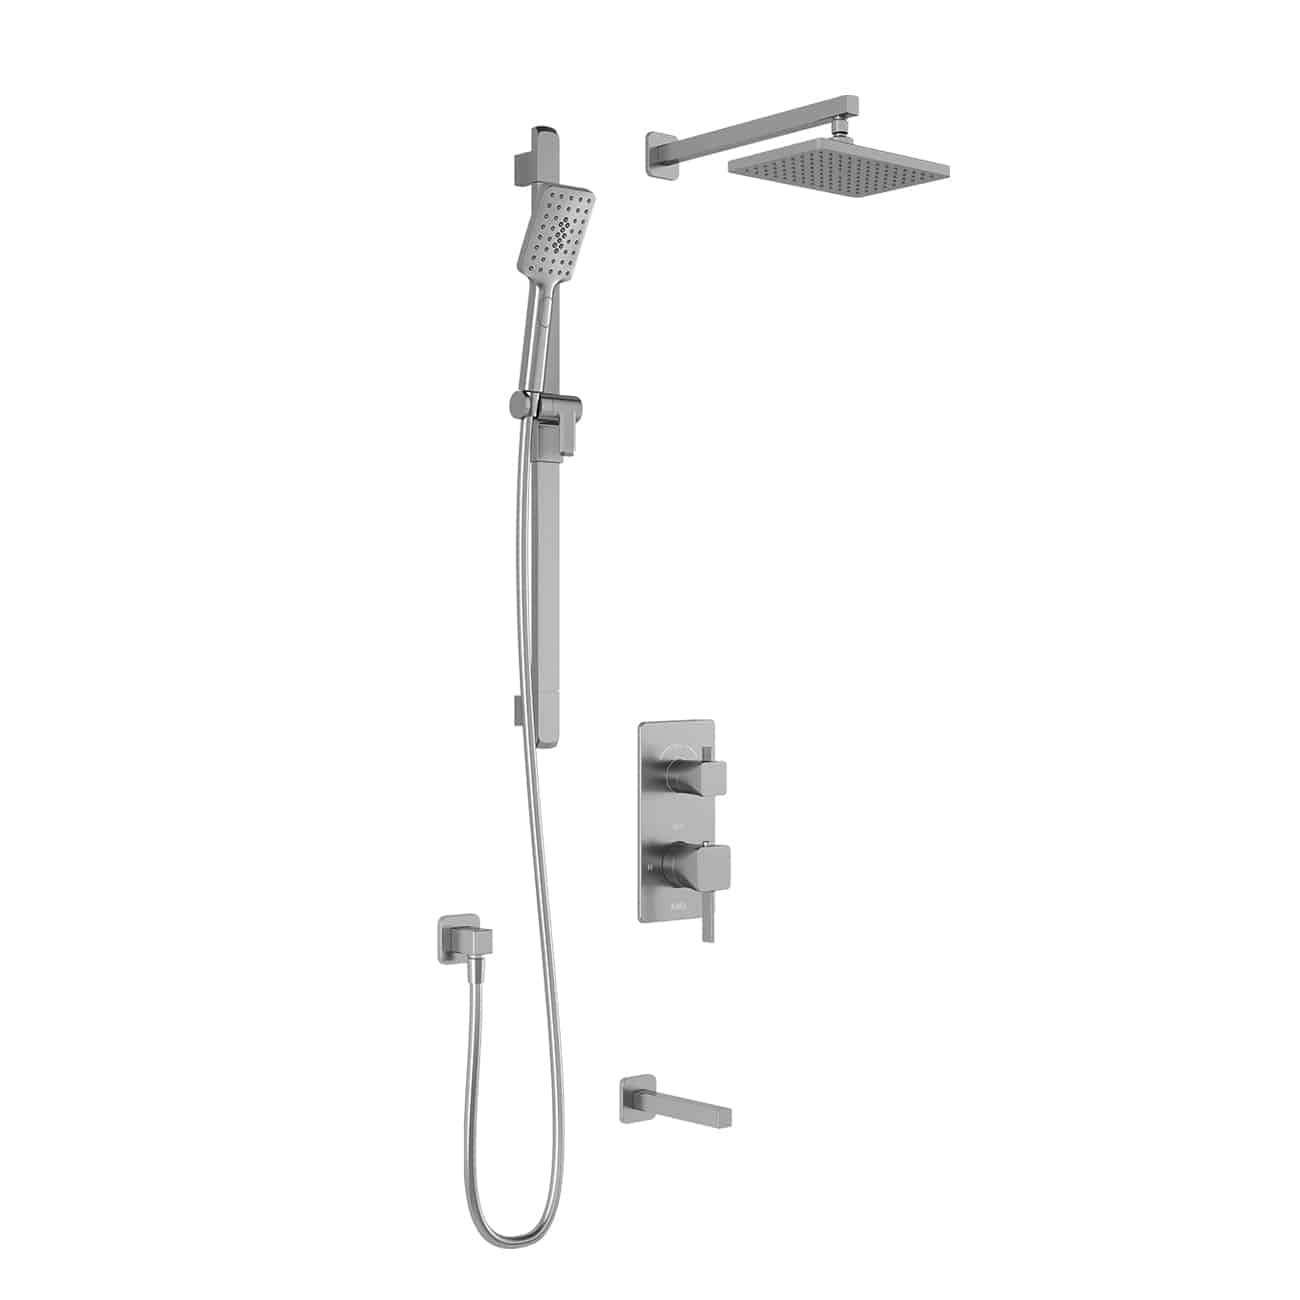 Kalia SquareOne TD3 (Valve Not Included) AQUATONIK T/P with Diverter Shower System with 10-1/4" Shower Head and Wall Arm -Chrome